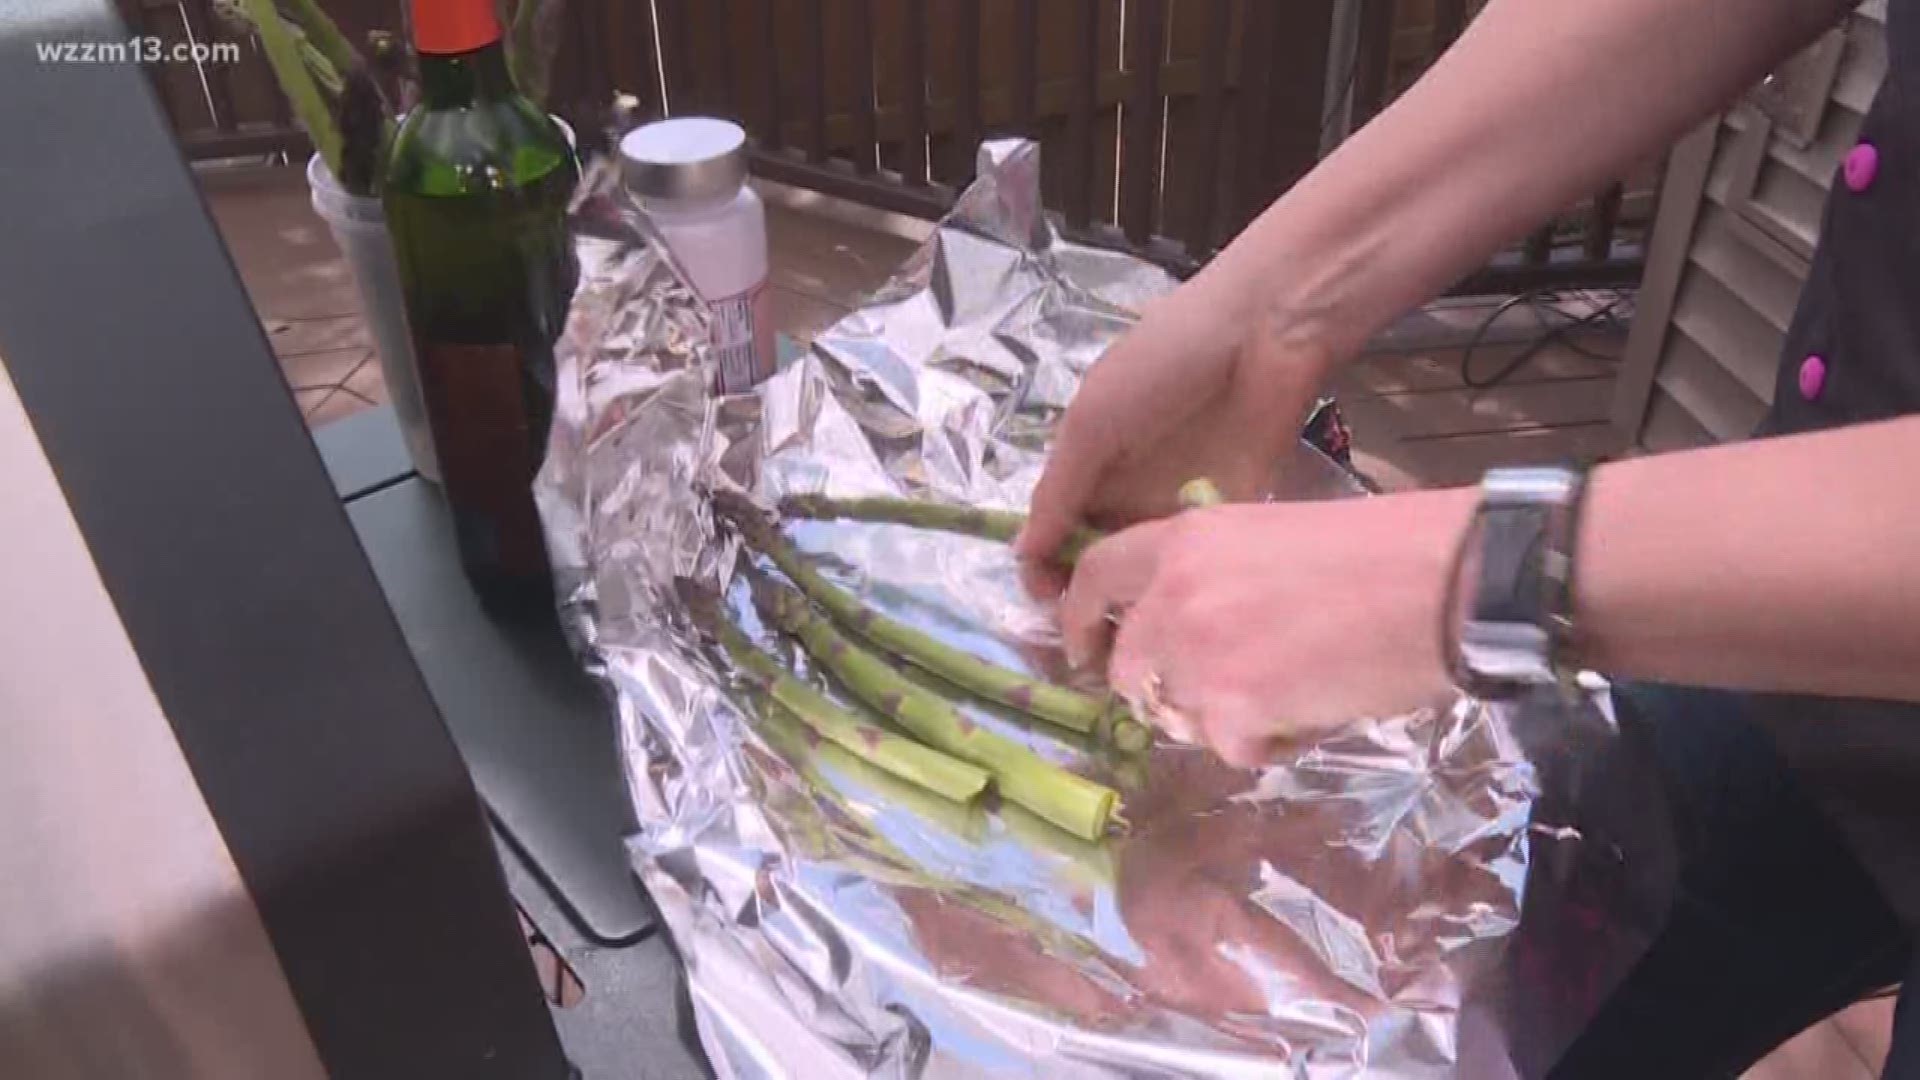 Grilling vegetables gives them a special flavor, but you can do it multiple ways to switch things up.